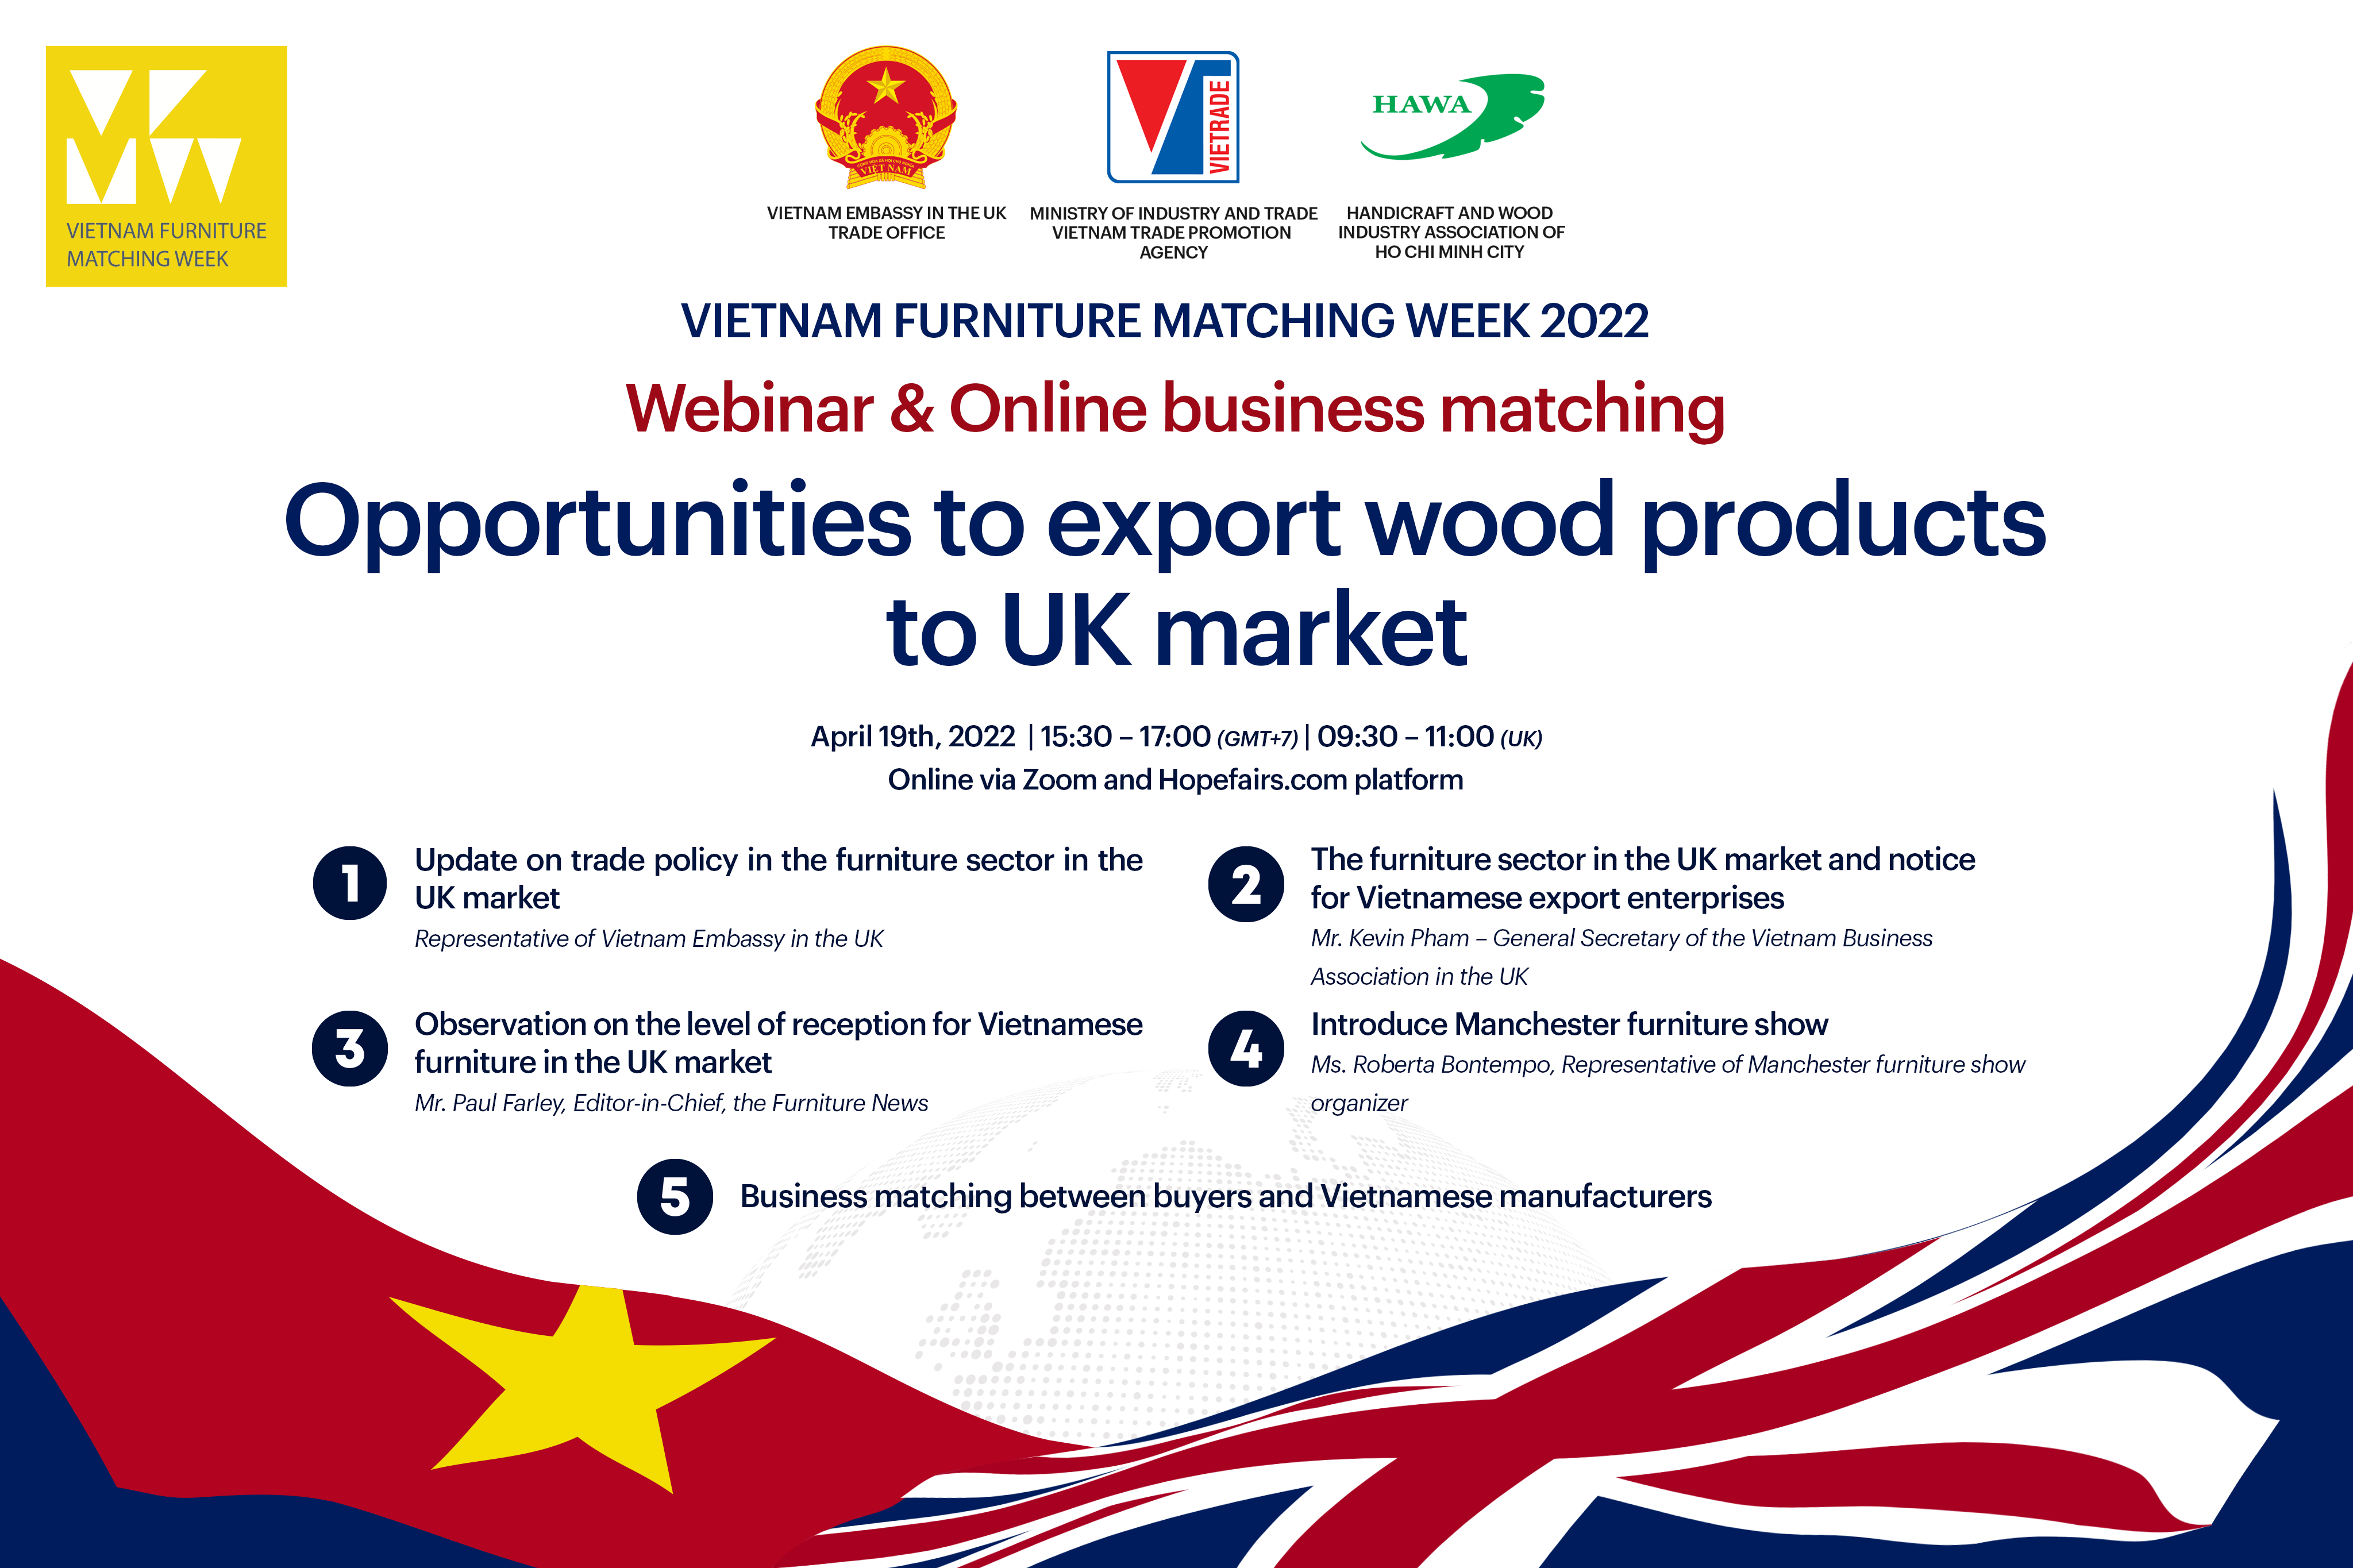 Webinar & Online business matching: Opportunities to export wood products to UK market